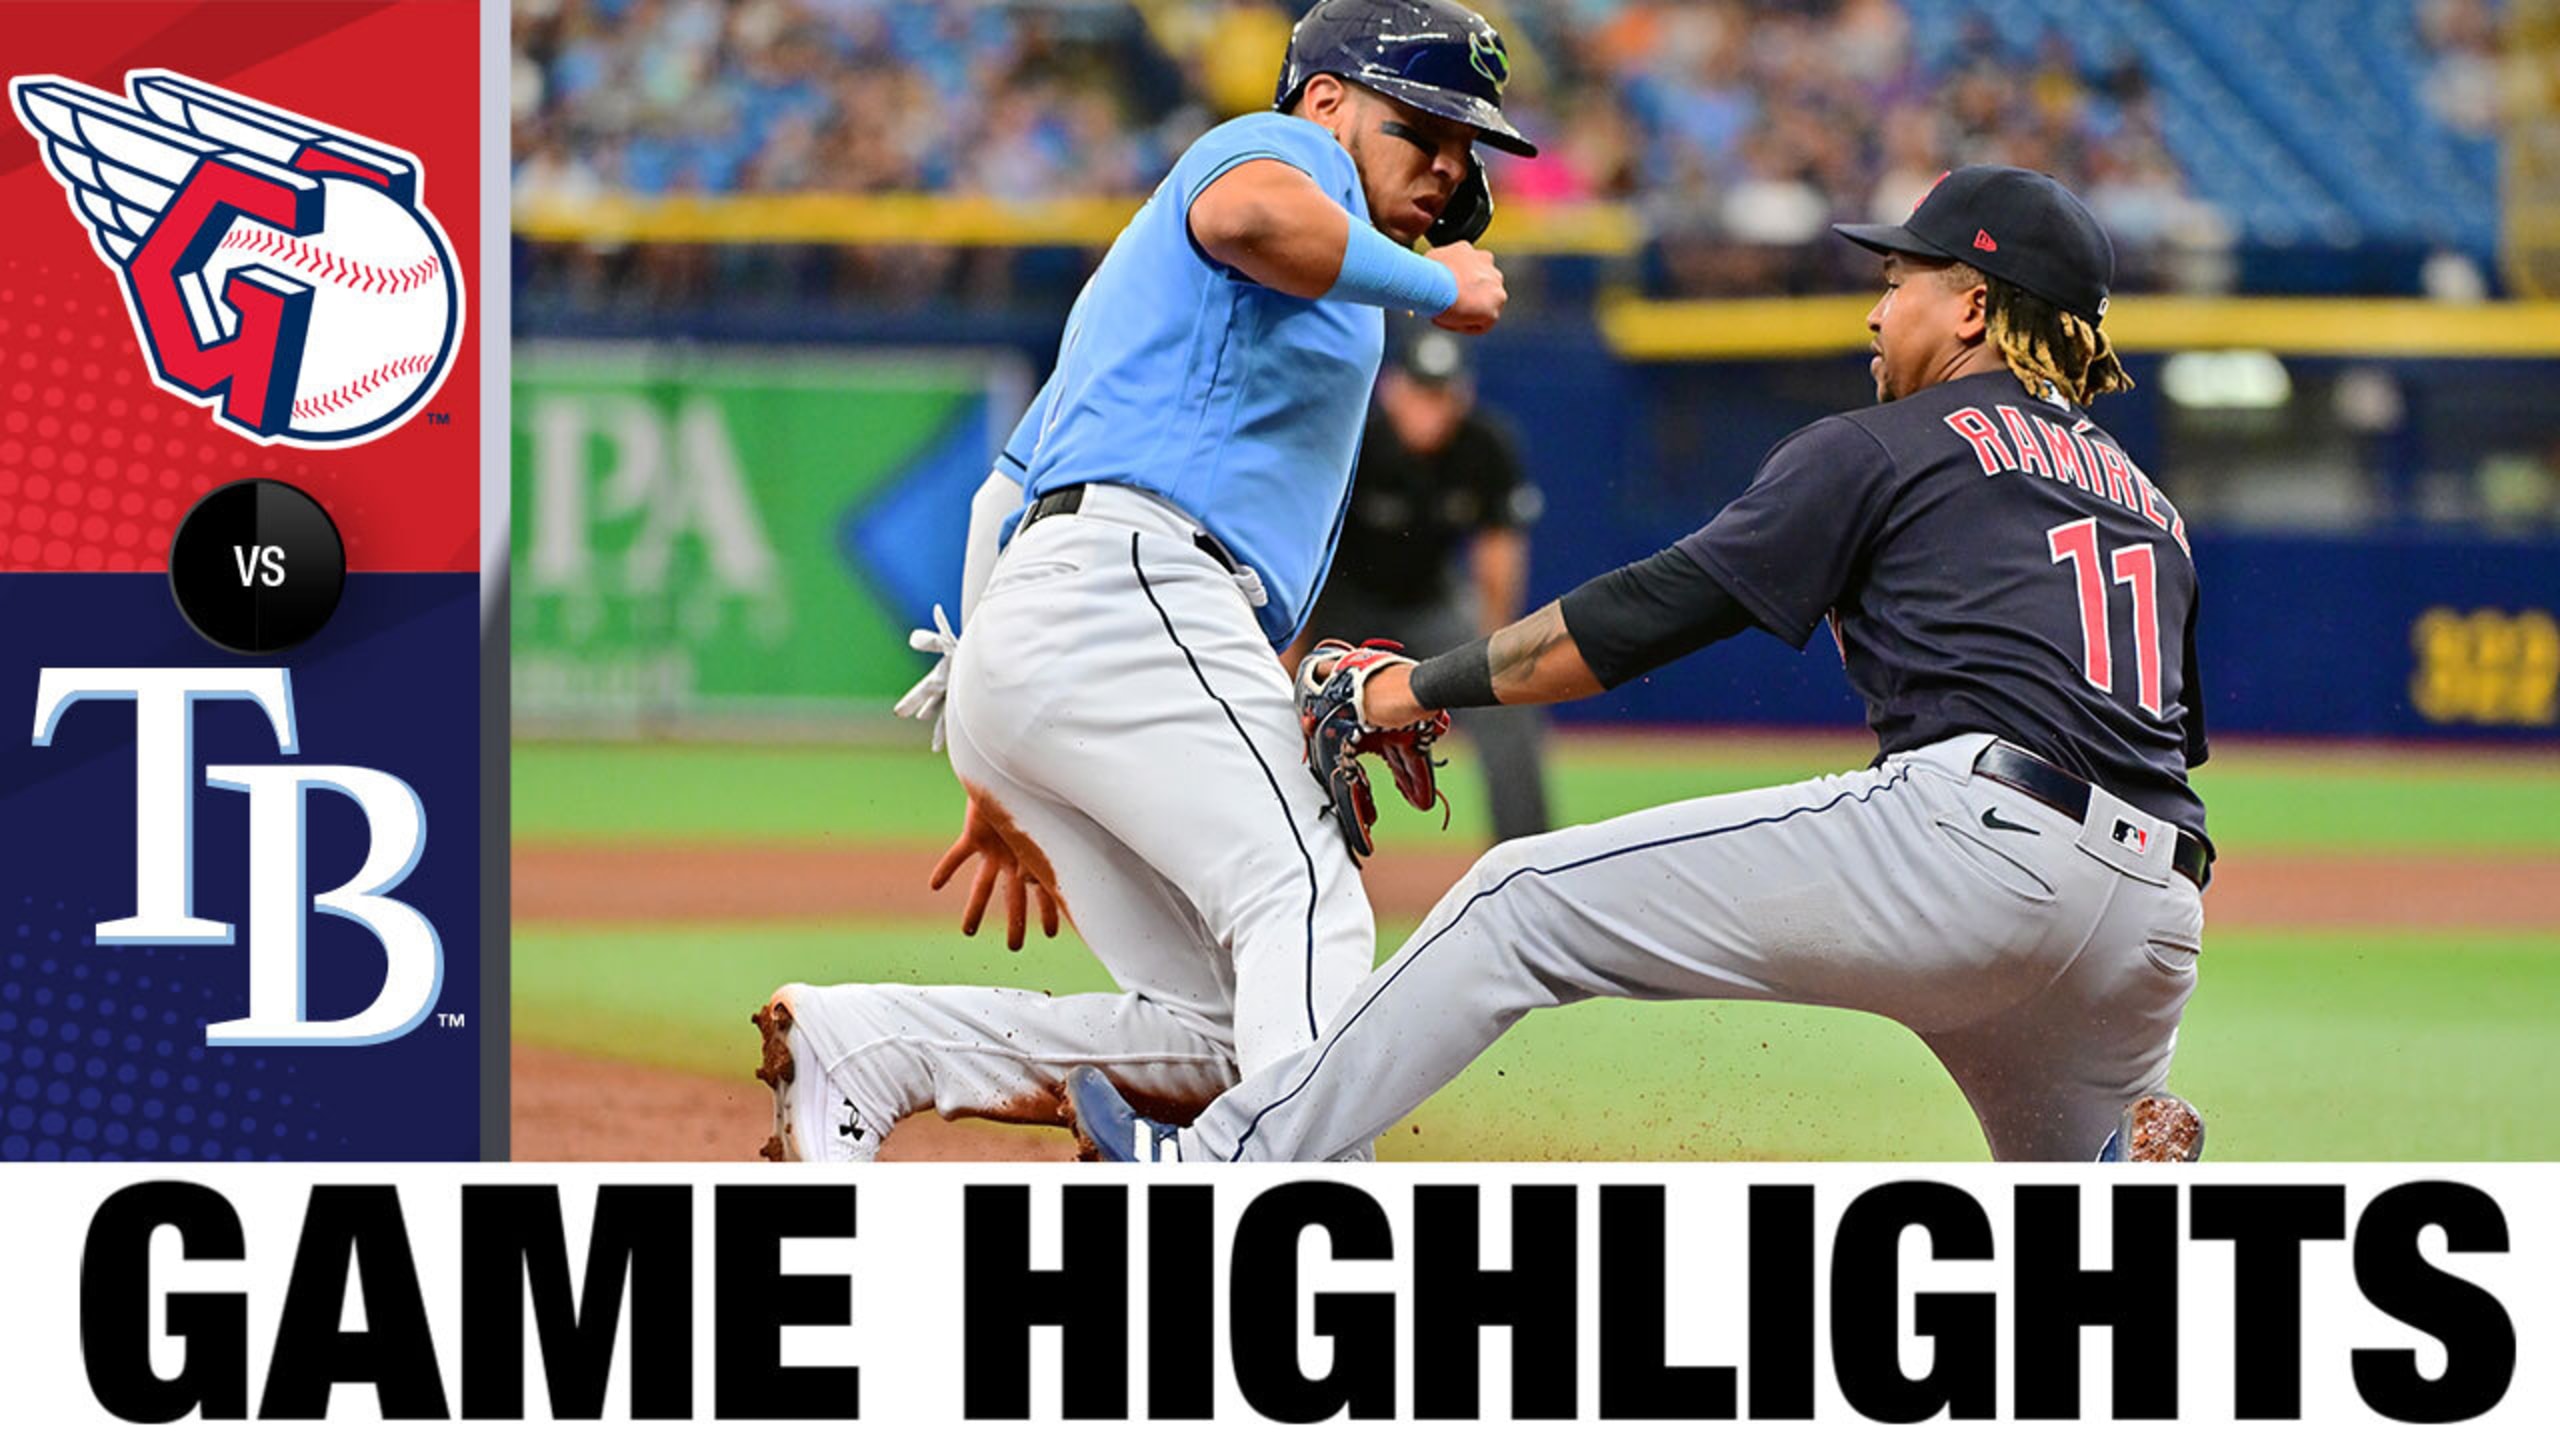 Yankees Rivalry Roundup: Astros escape Atlanta with a win, Rays down Royals  - Pinstripe Alley